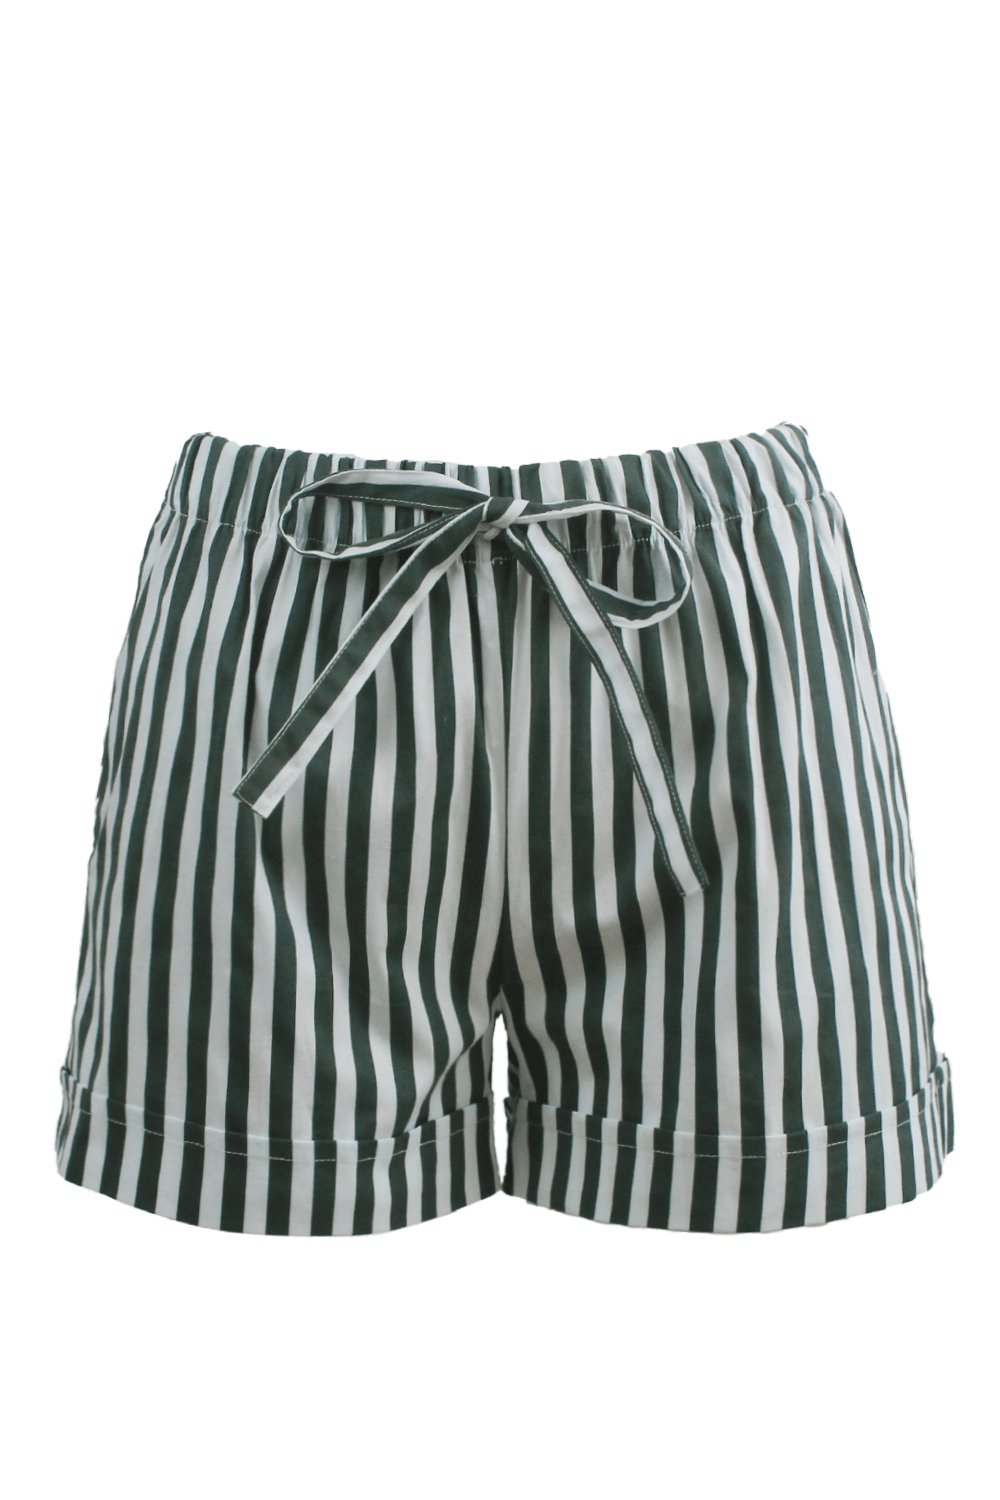 Corsica Striped Cotton Shorts Forest Green Pants